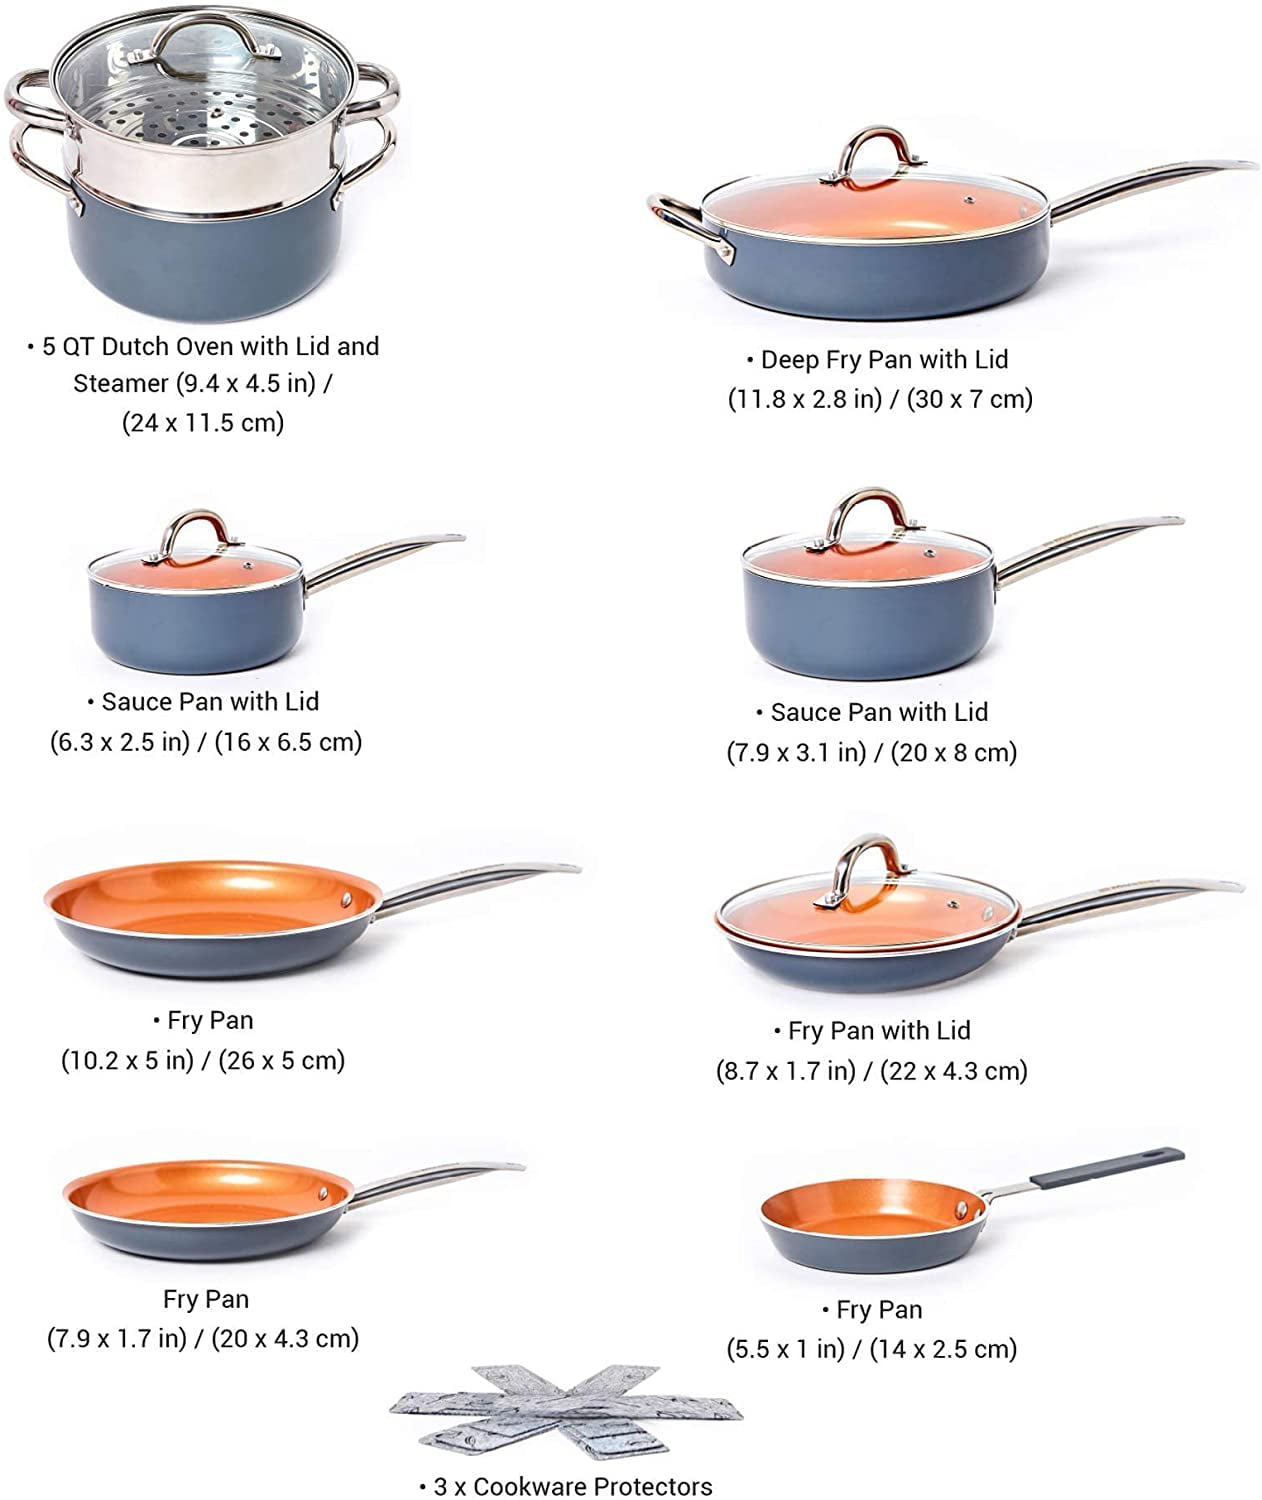  Mueller UltraClad Copper Pots and Pans Set, 14-Piece Kitchen  Cookware Set, Non-Stick Coating, Aluminum Body, Includes Fry Pans, Deep  Frying Pan, Sauce Pans, Dutch Oven and More: Home & Kitchen